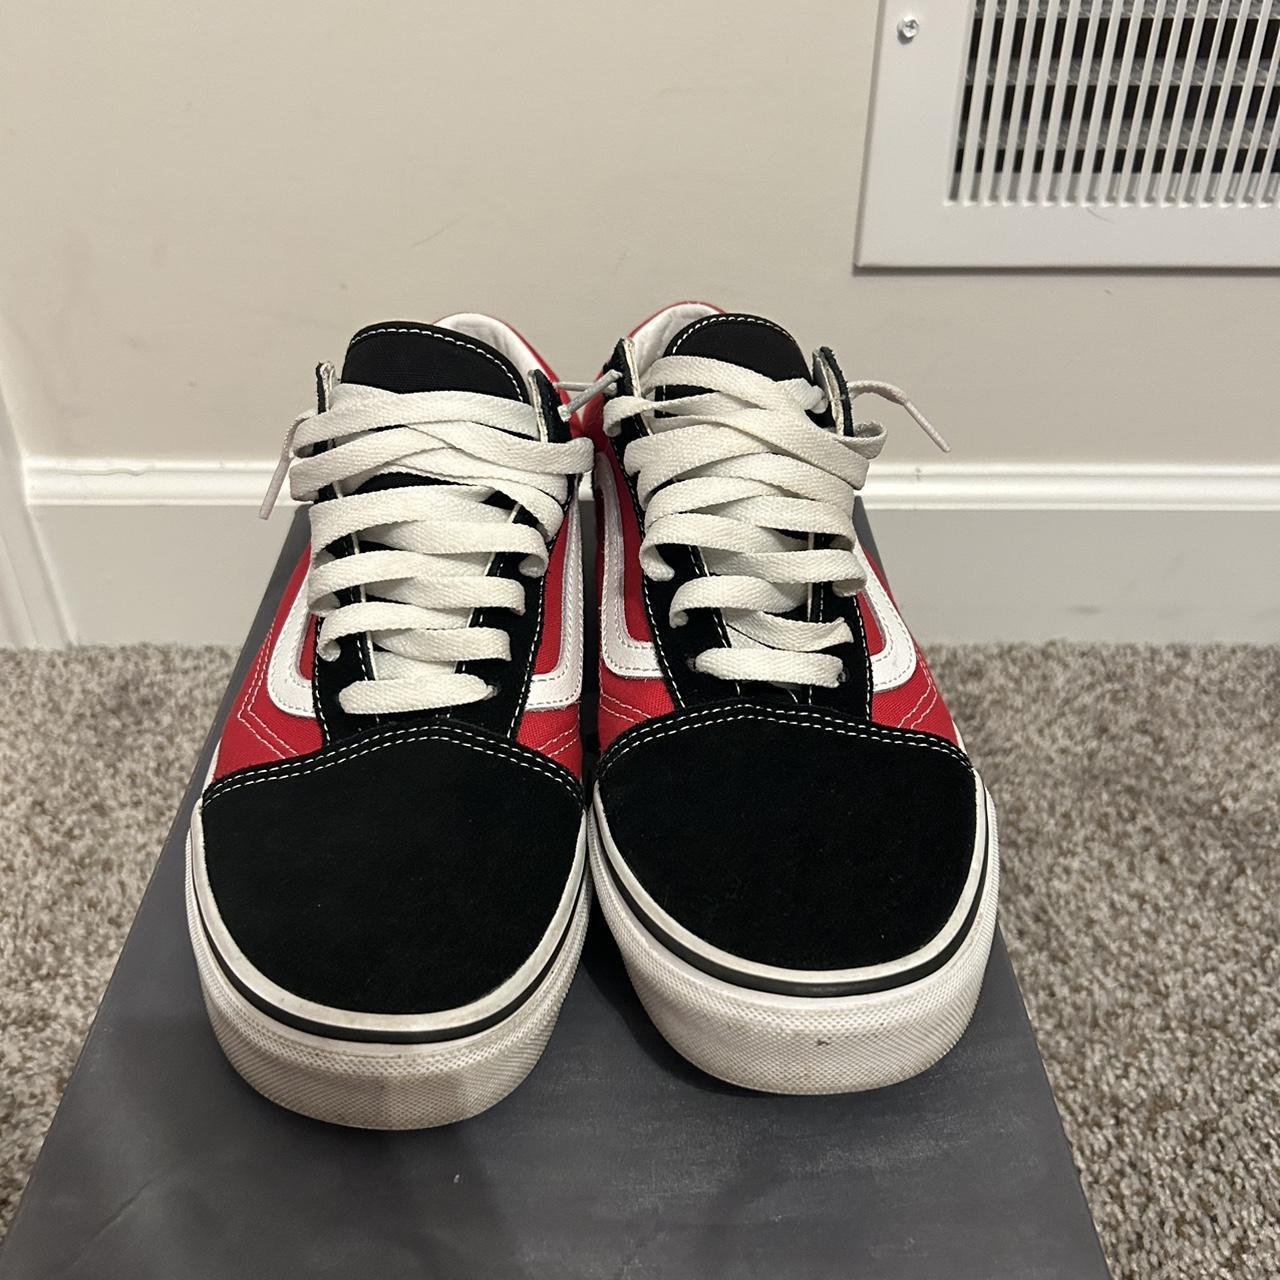 Vans Men's Red and Black Trainers (4)